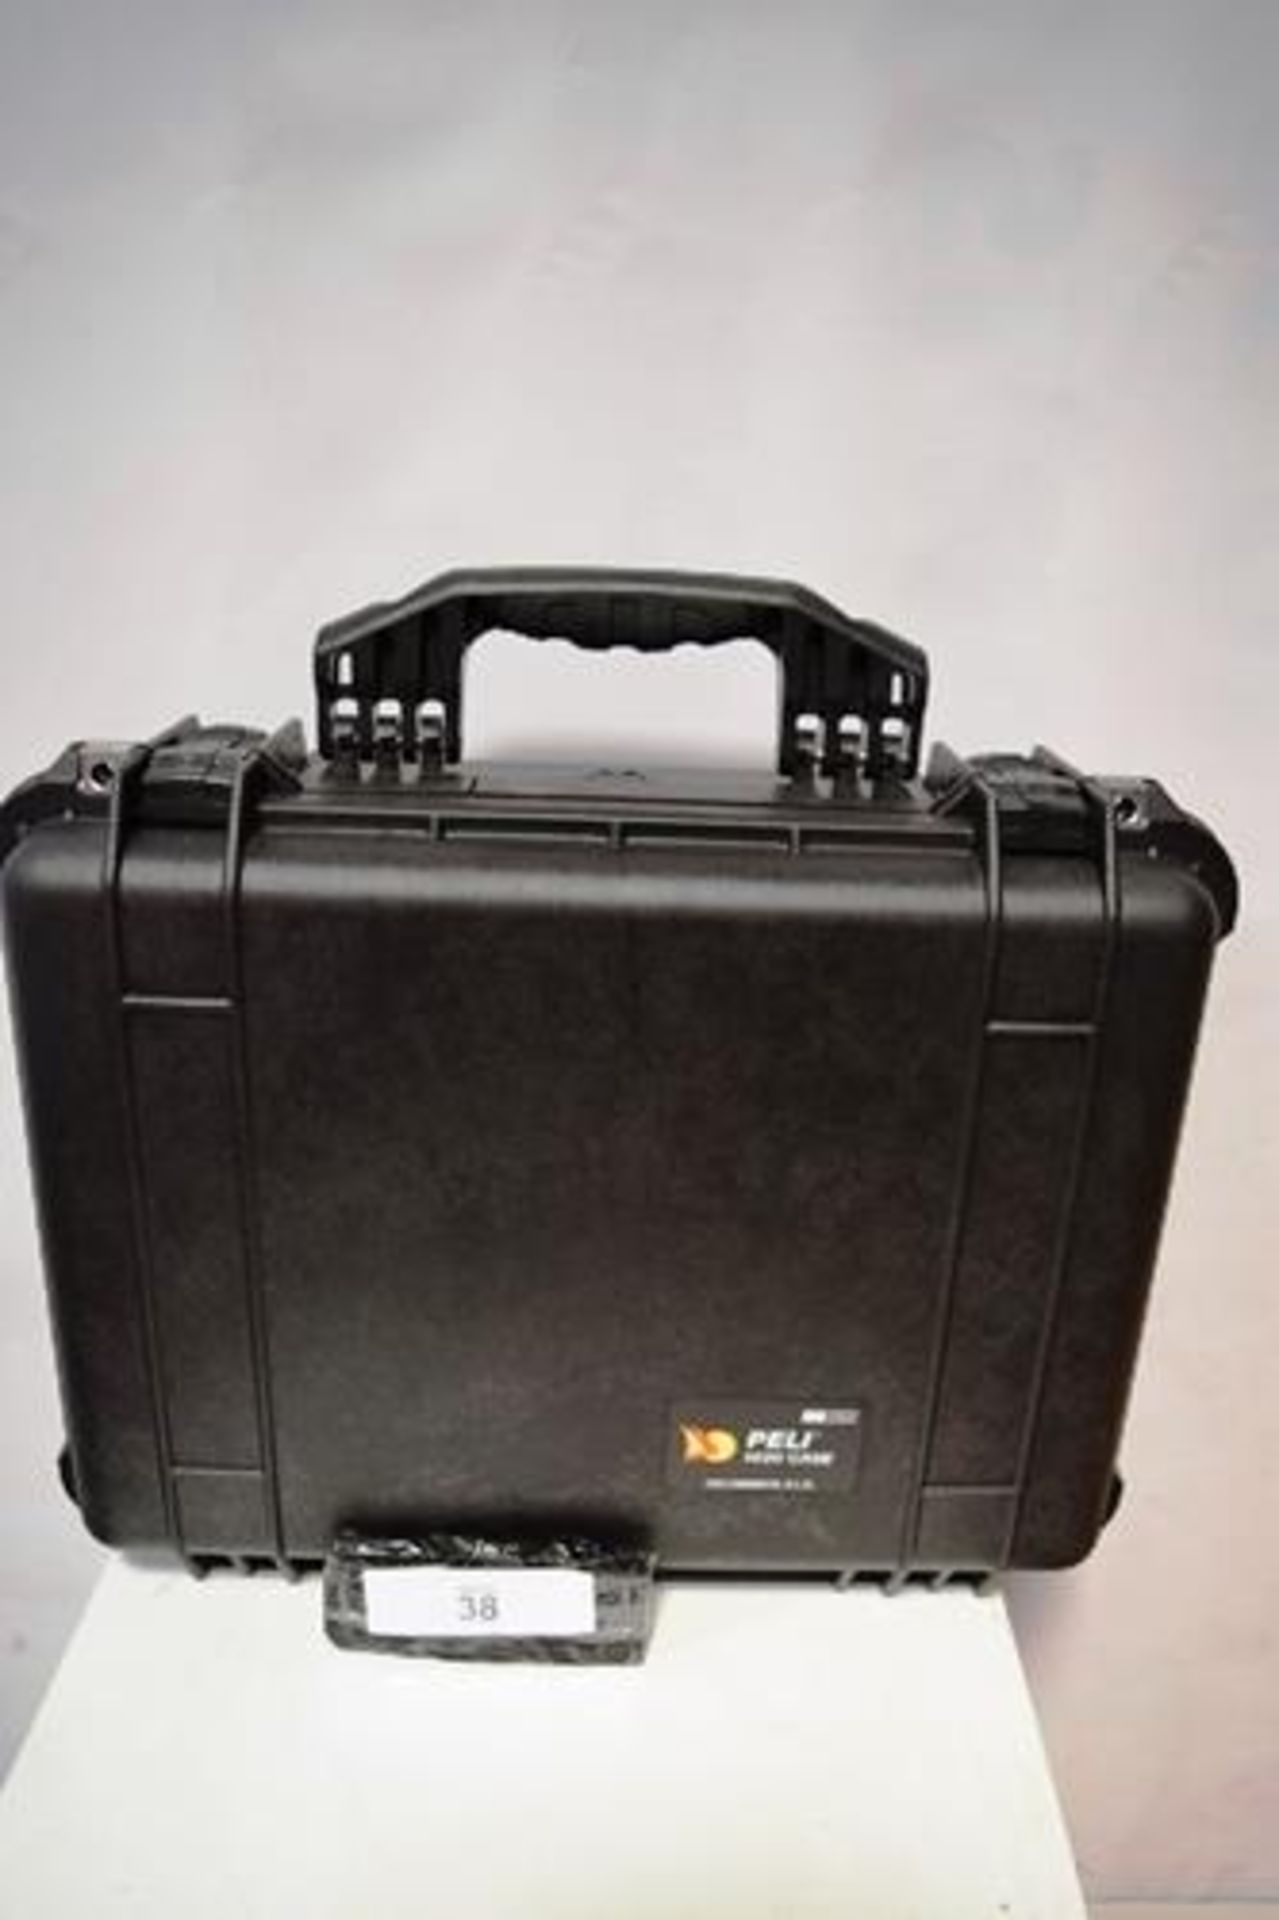 2 x Peli safety boxes with black foam inner support P.N. 1520-000-110E - Sealed new in box (SW9) - Image 2 of 2